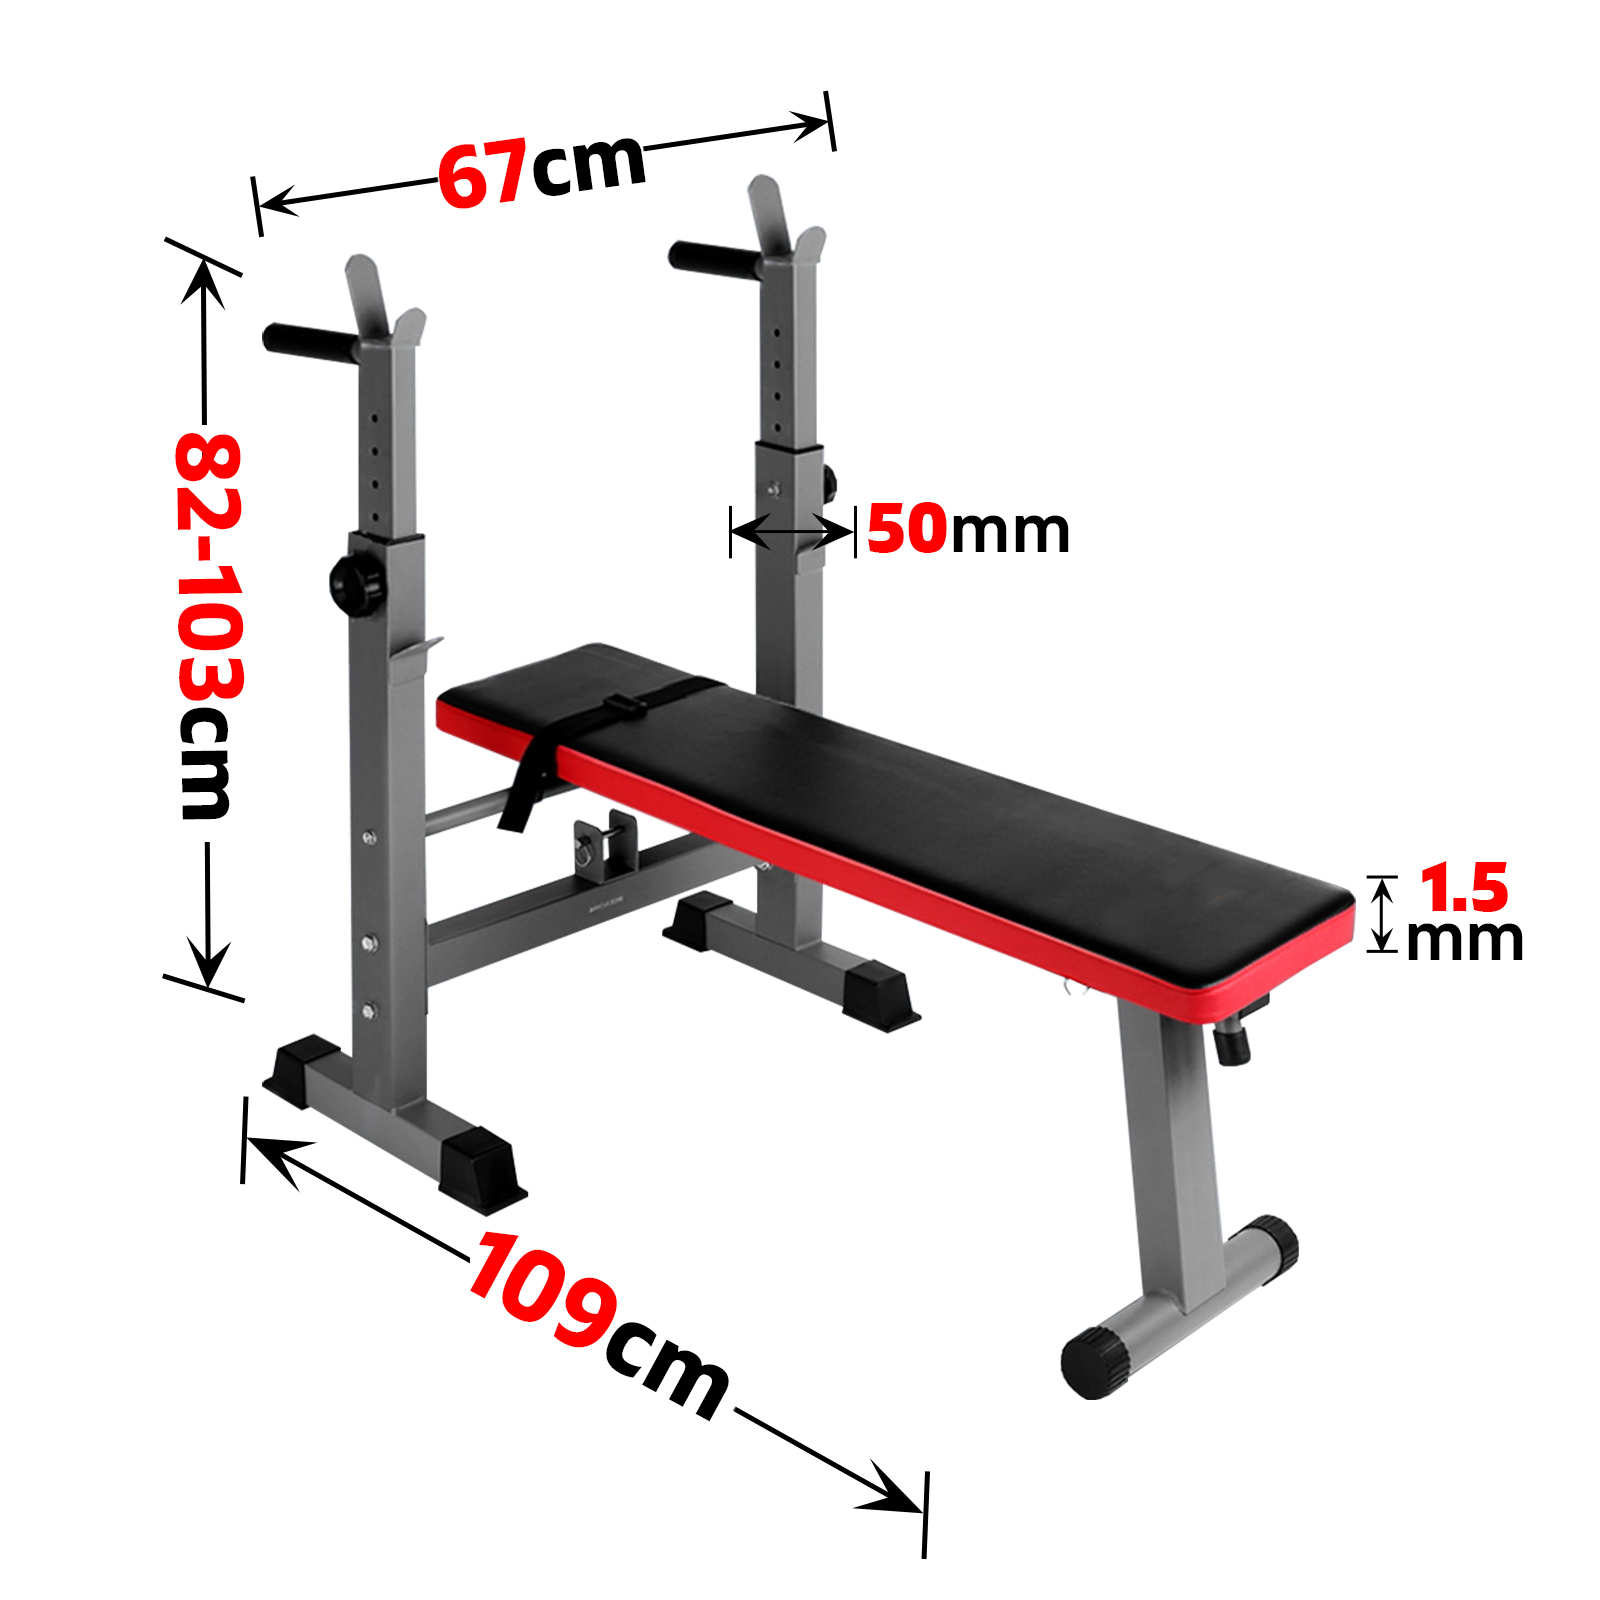 Multi-Station Weight Bench Press Weights Equipment Fitness Workout Home Gym Red